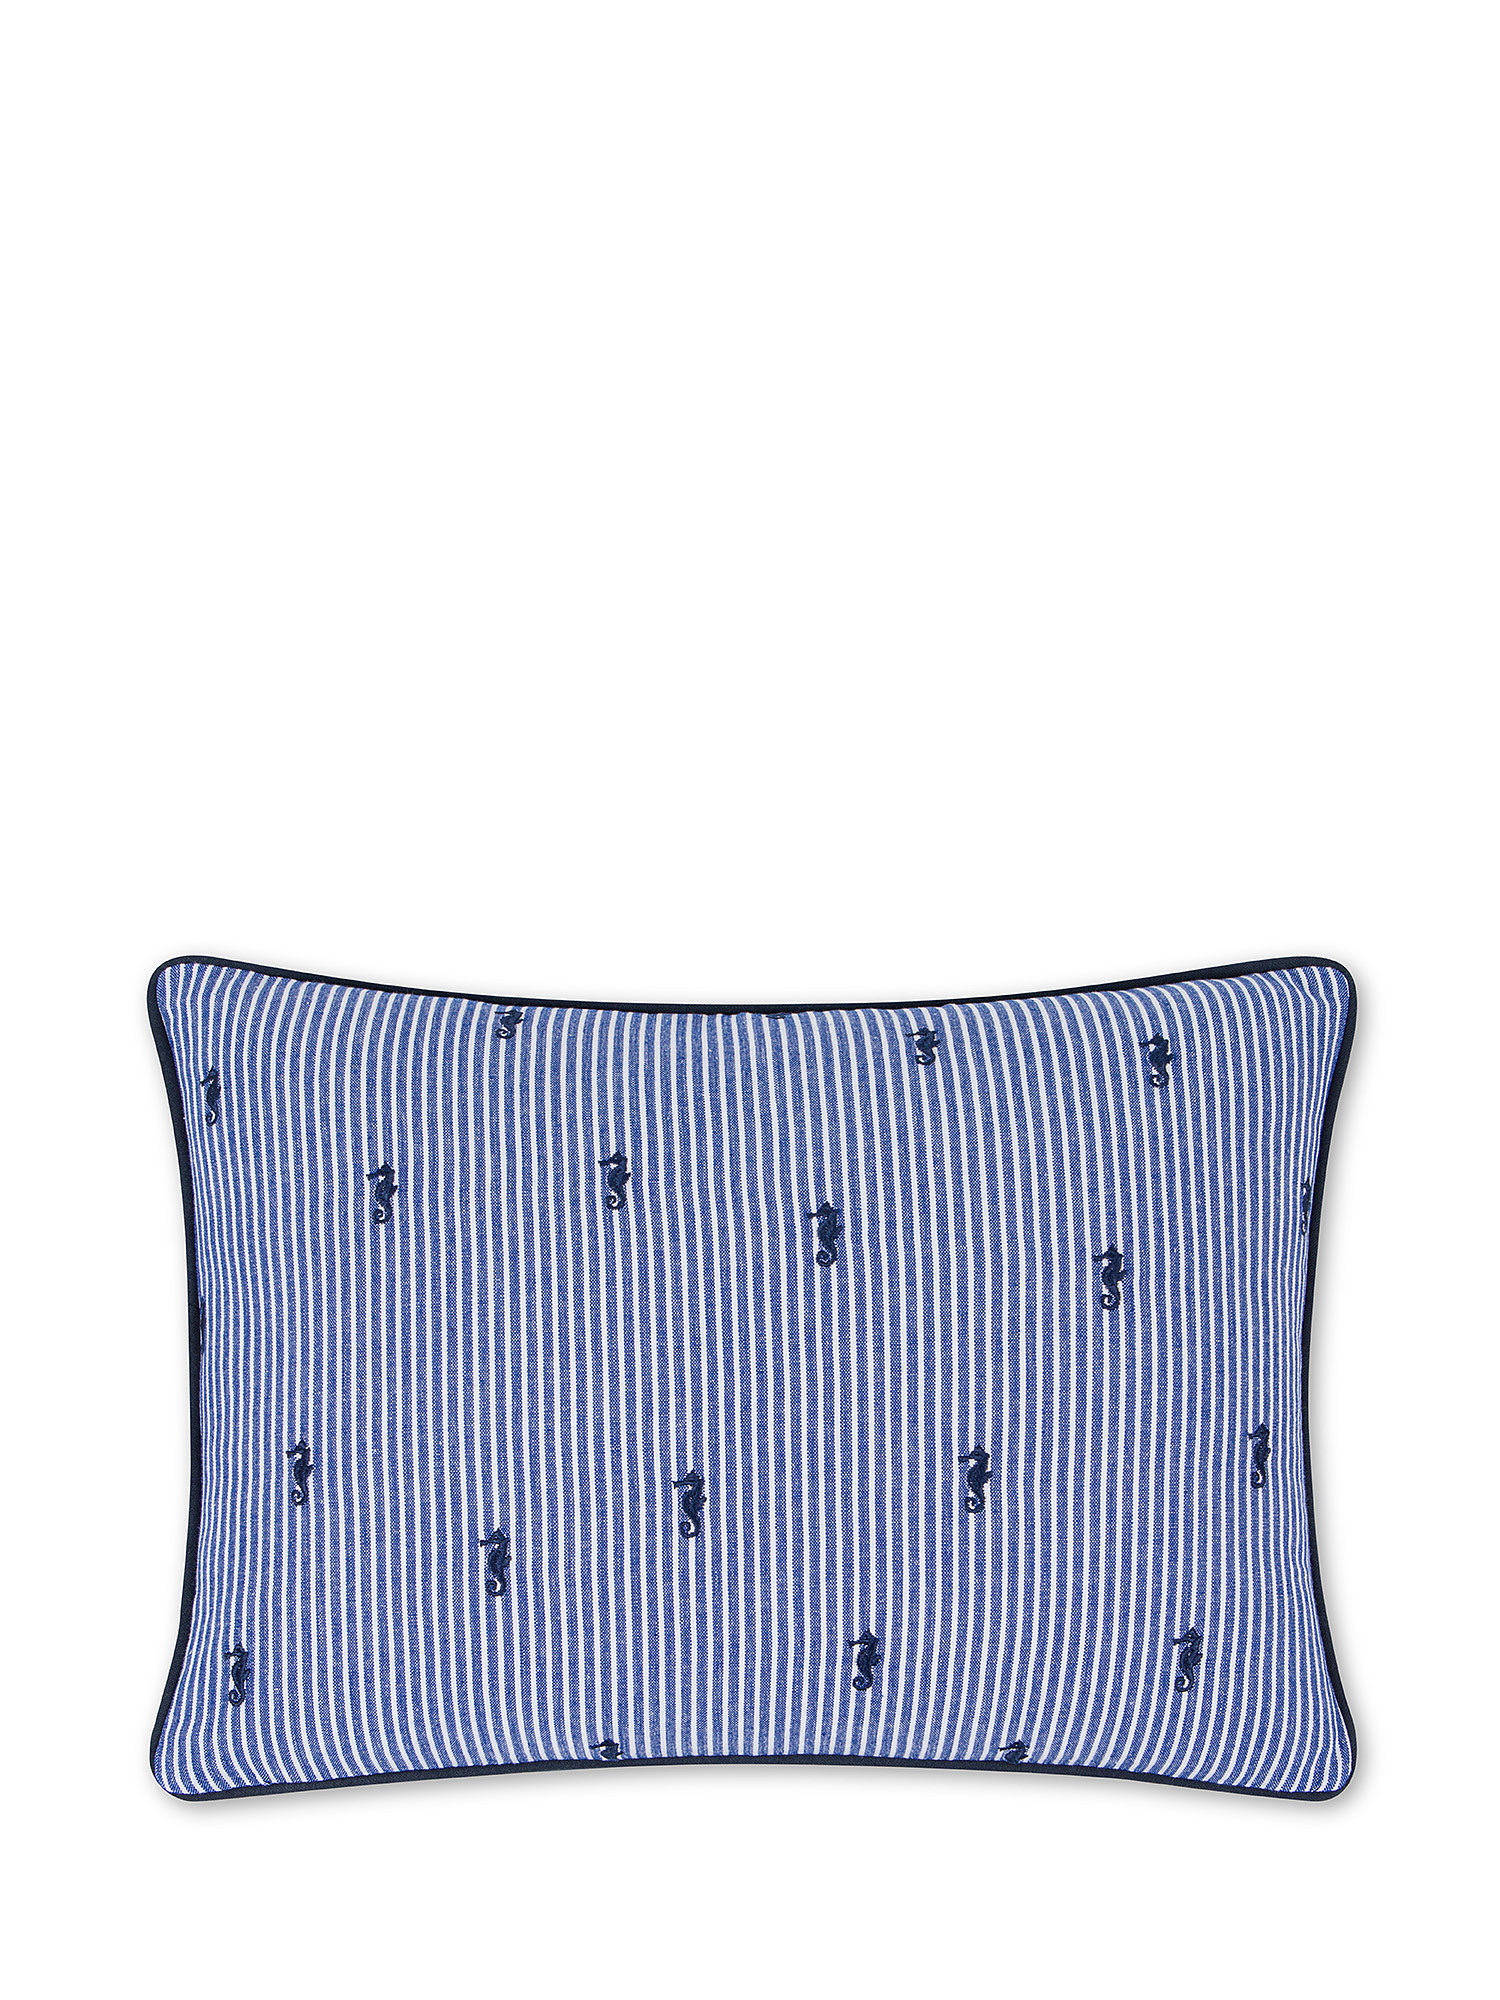 35X50 cm cotton cushion with embroidery, White / Blue, large image number 0